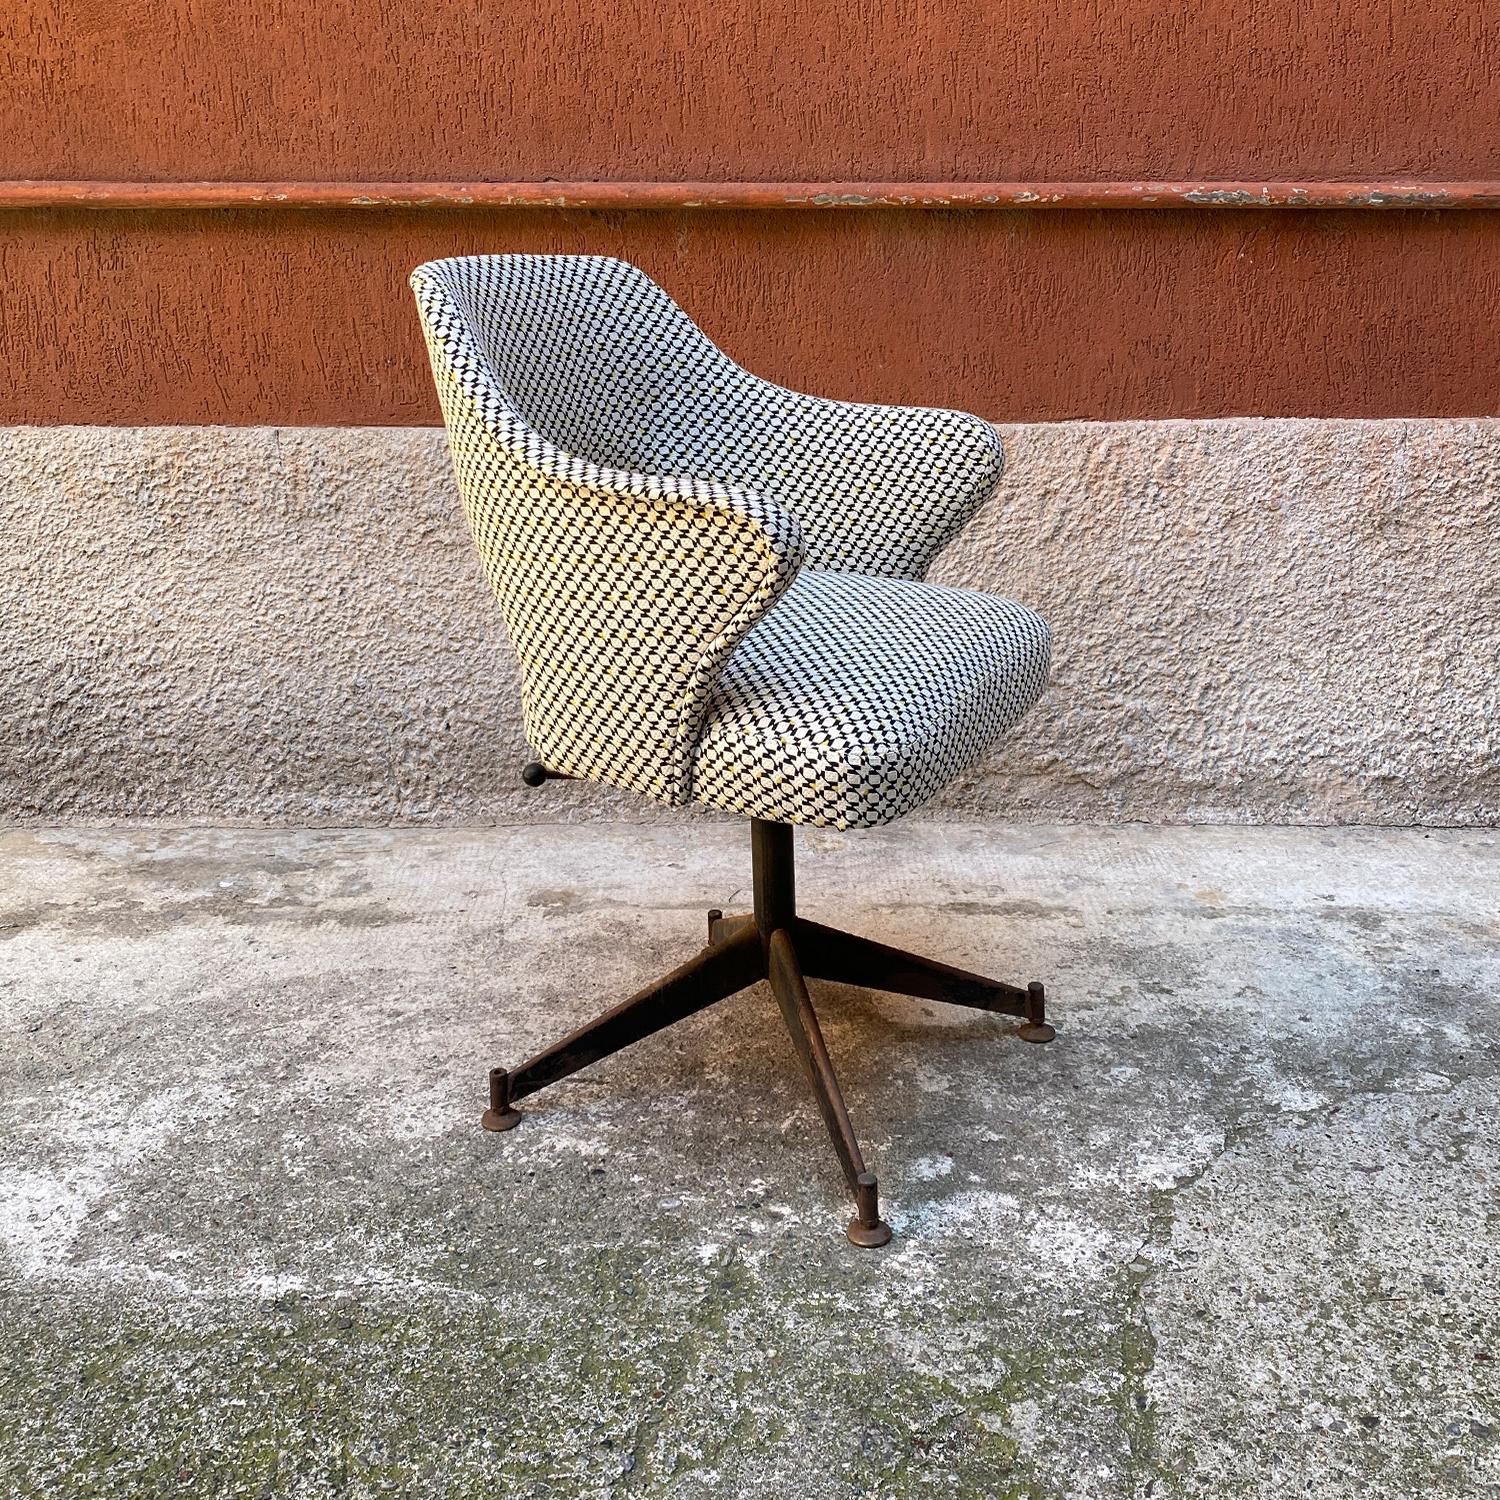 Italian Mid-Century Modern swivel pied de poule armchair, 1960s
Swivel pied de poule armchair with armrests and central leg in metal with four spokes, not yet repainted.

Excellent condition, with new padding and fabric.

Measurements 60 x 58 x